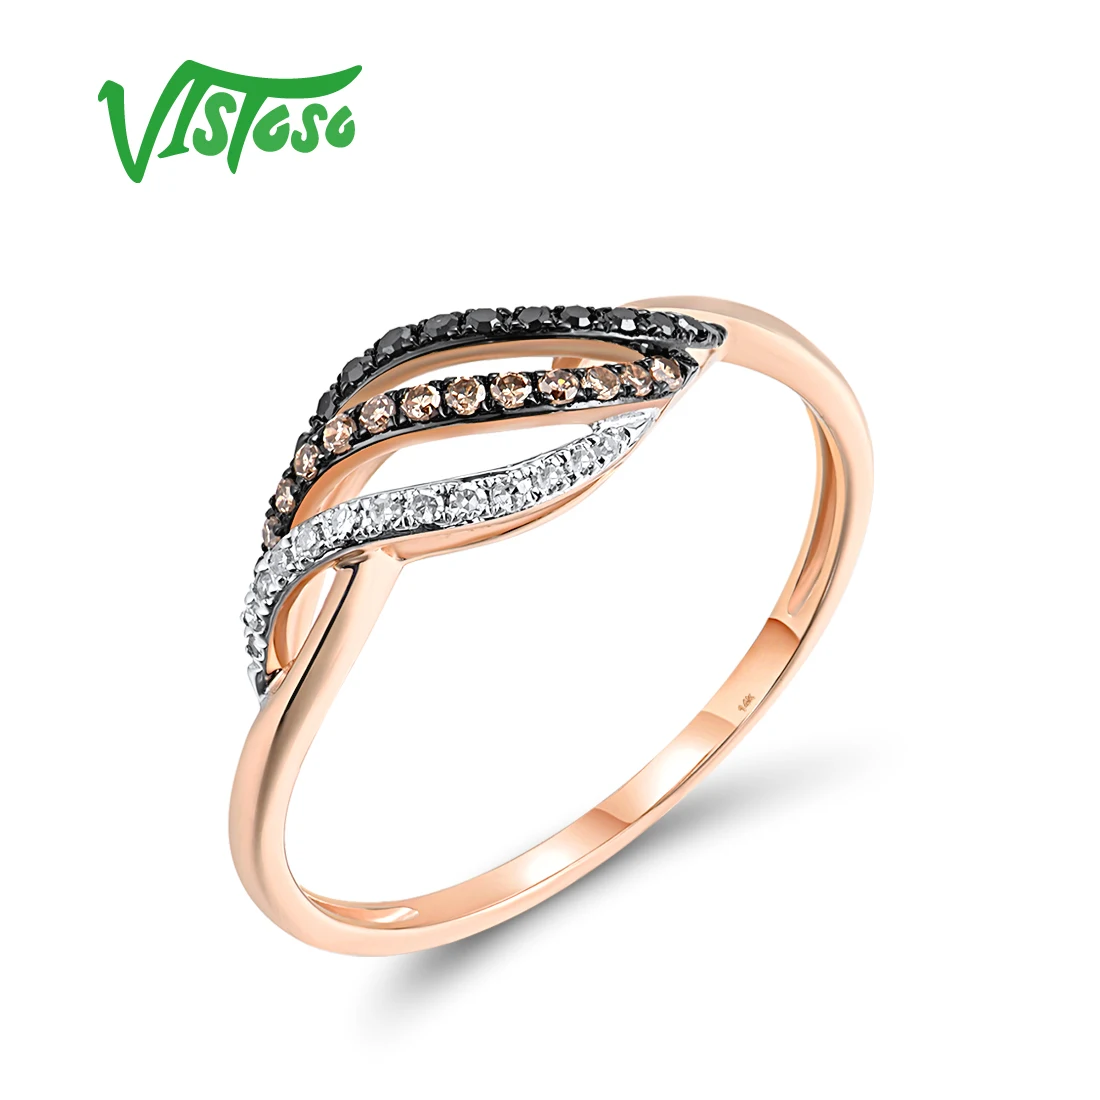 

VISTOSO Real 14K 585 Yellow Gold Ring For Women Sparkling White Black Brown Diamonds Vintage Wedding Delicate Gifts Fine Jewelry